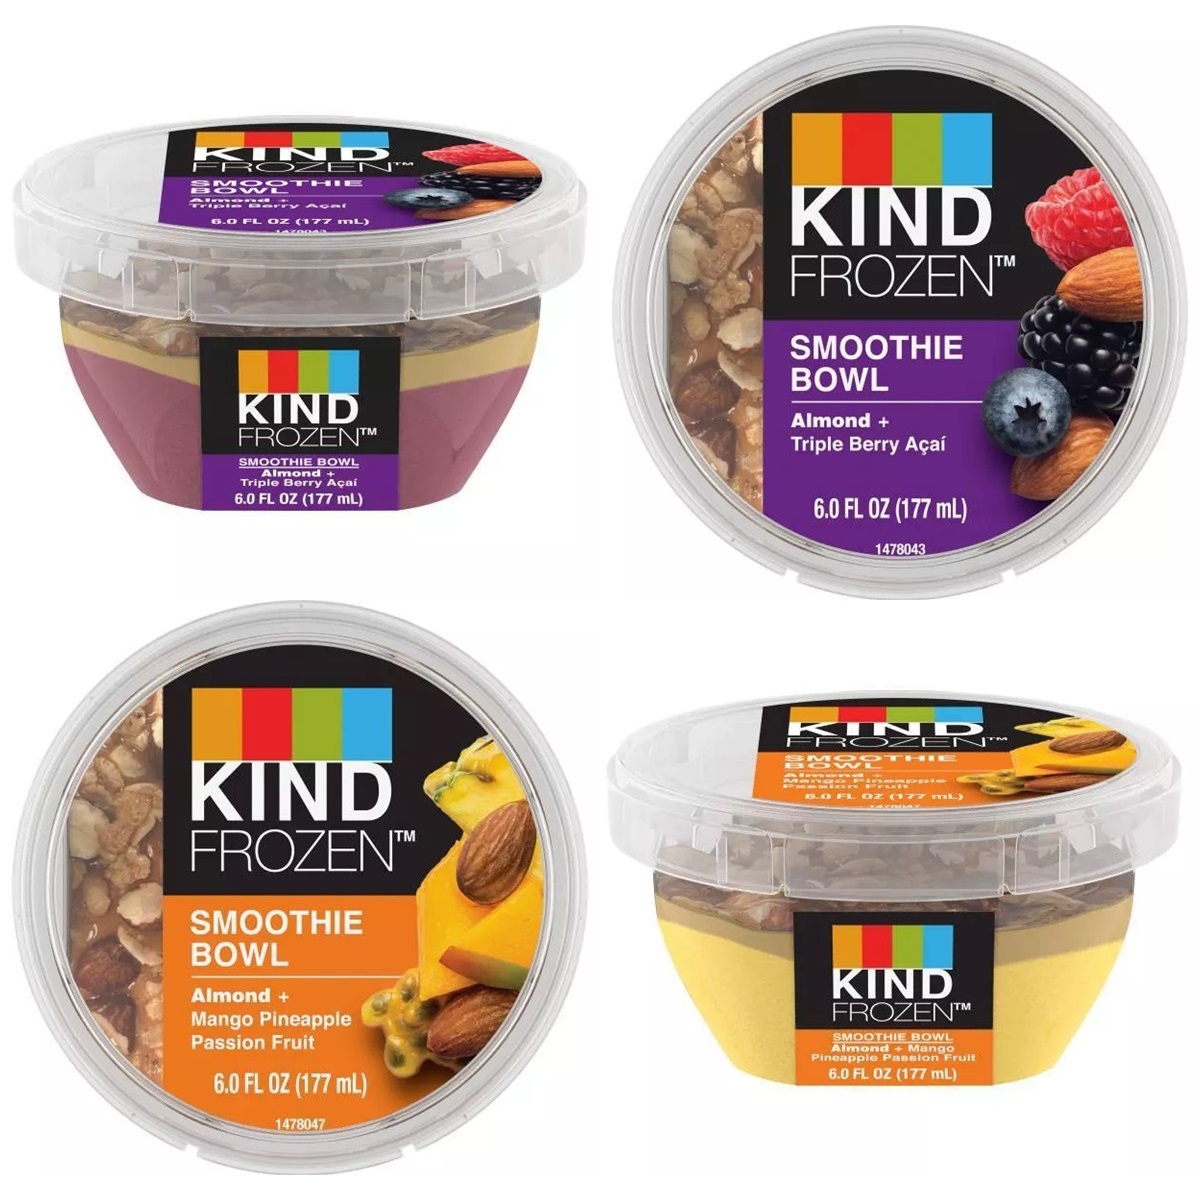 Kind Frozen Smoothie Bowls Reviews and Info - Layered dairy-free, vegan smoothies sold in the ice cream section (single serves). 